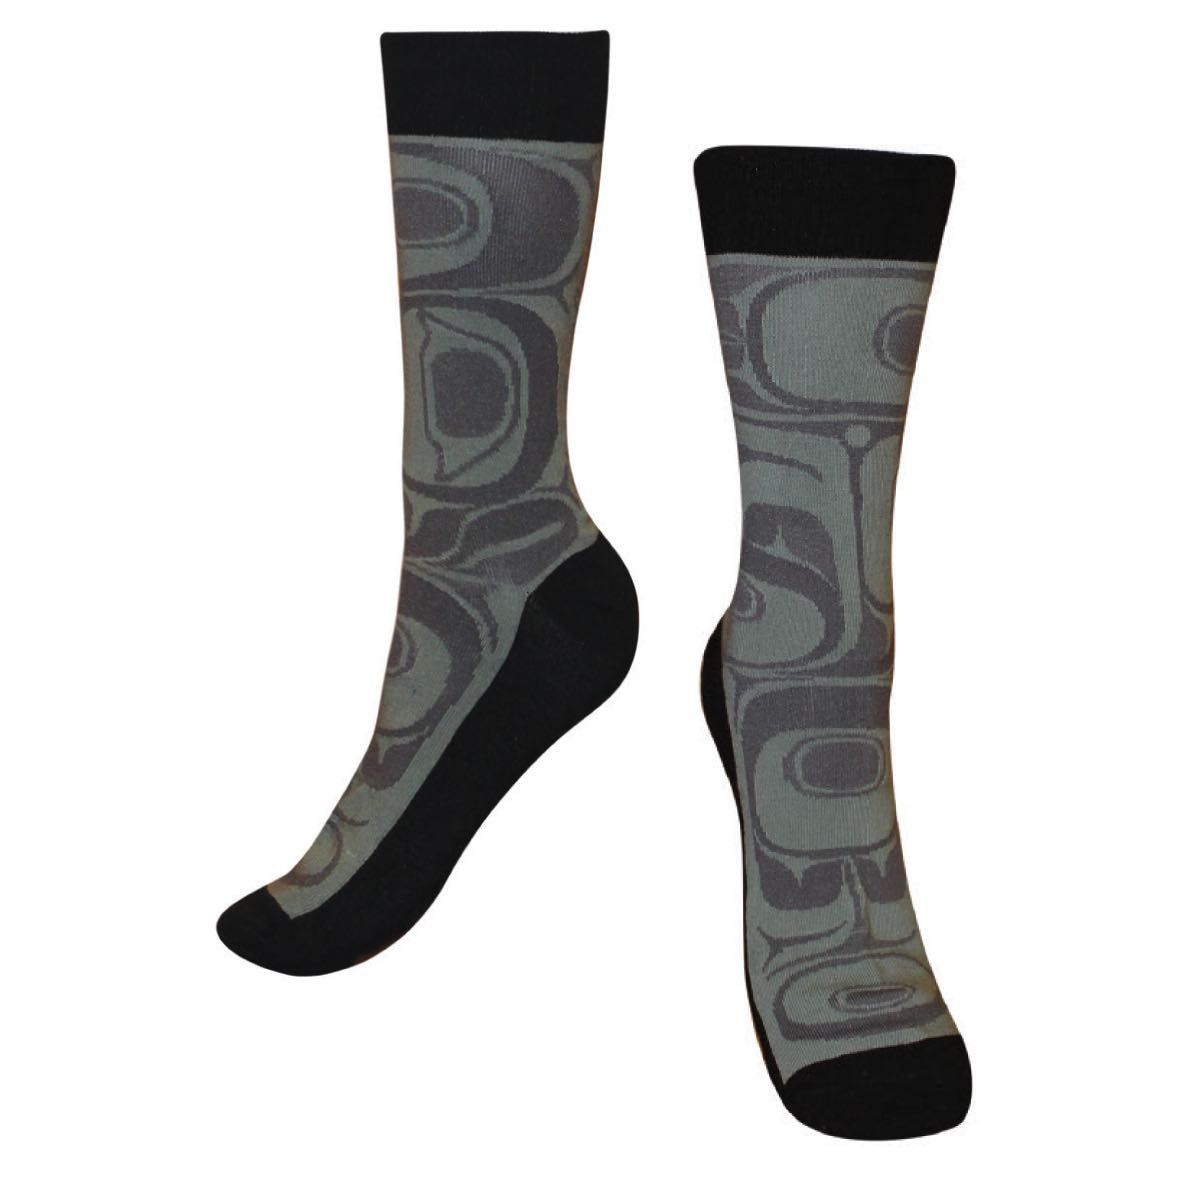 ART SOCKS - M/L / Allen Weir-Eagles/SOCK24 - SOCK24L - House of Himwitsa Native Art Gallery and Gifts